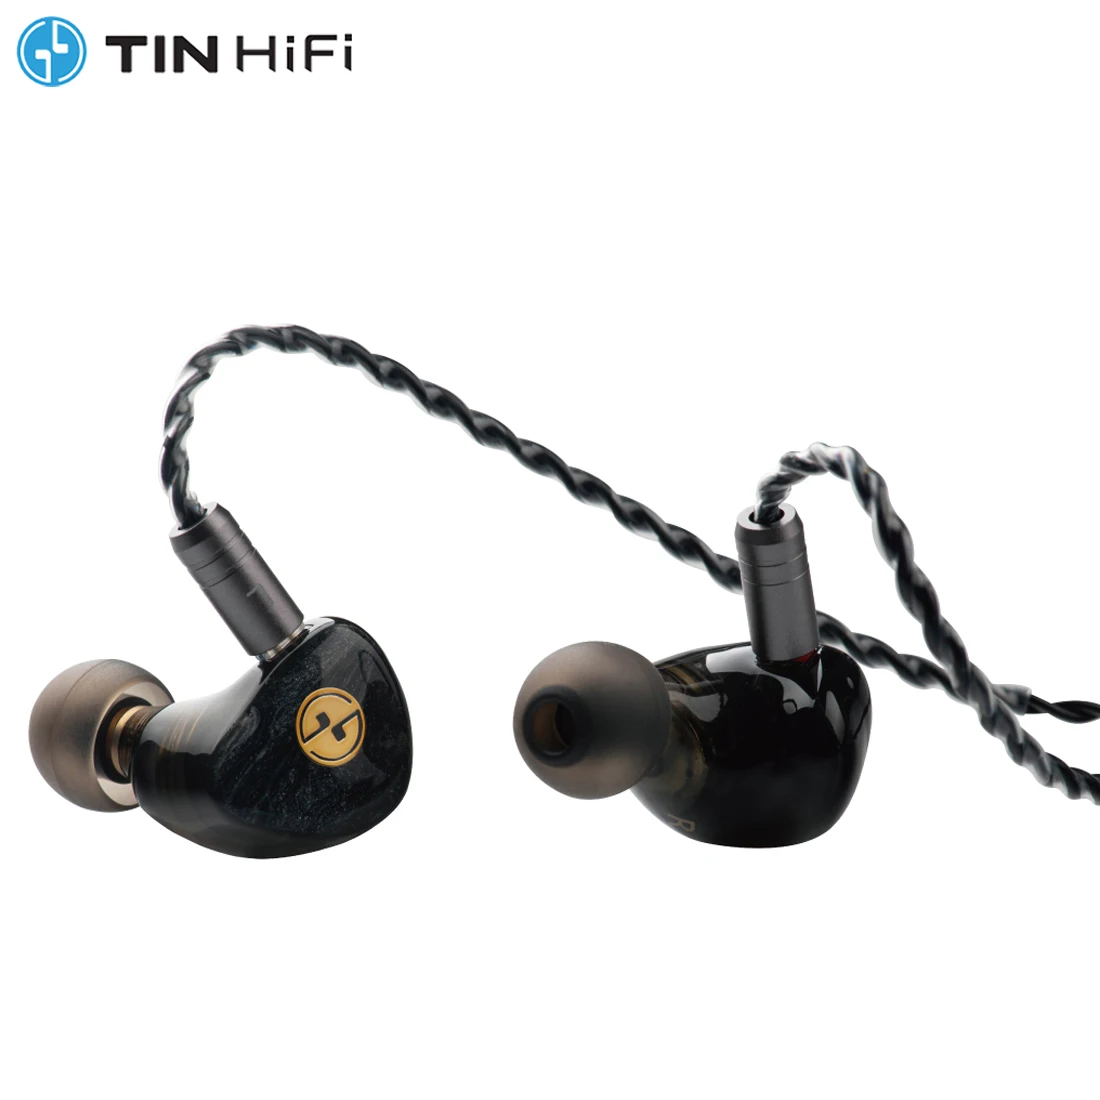 

TINHIFI T3 Plus Hi-Fi Earphone 10mm LCP Diaphragm In Ear Earbuds Wired Music Earphones IEM 2Pin Oxygen Free Copper Cable Headset